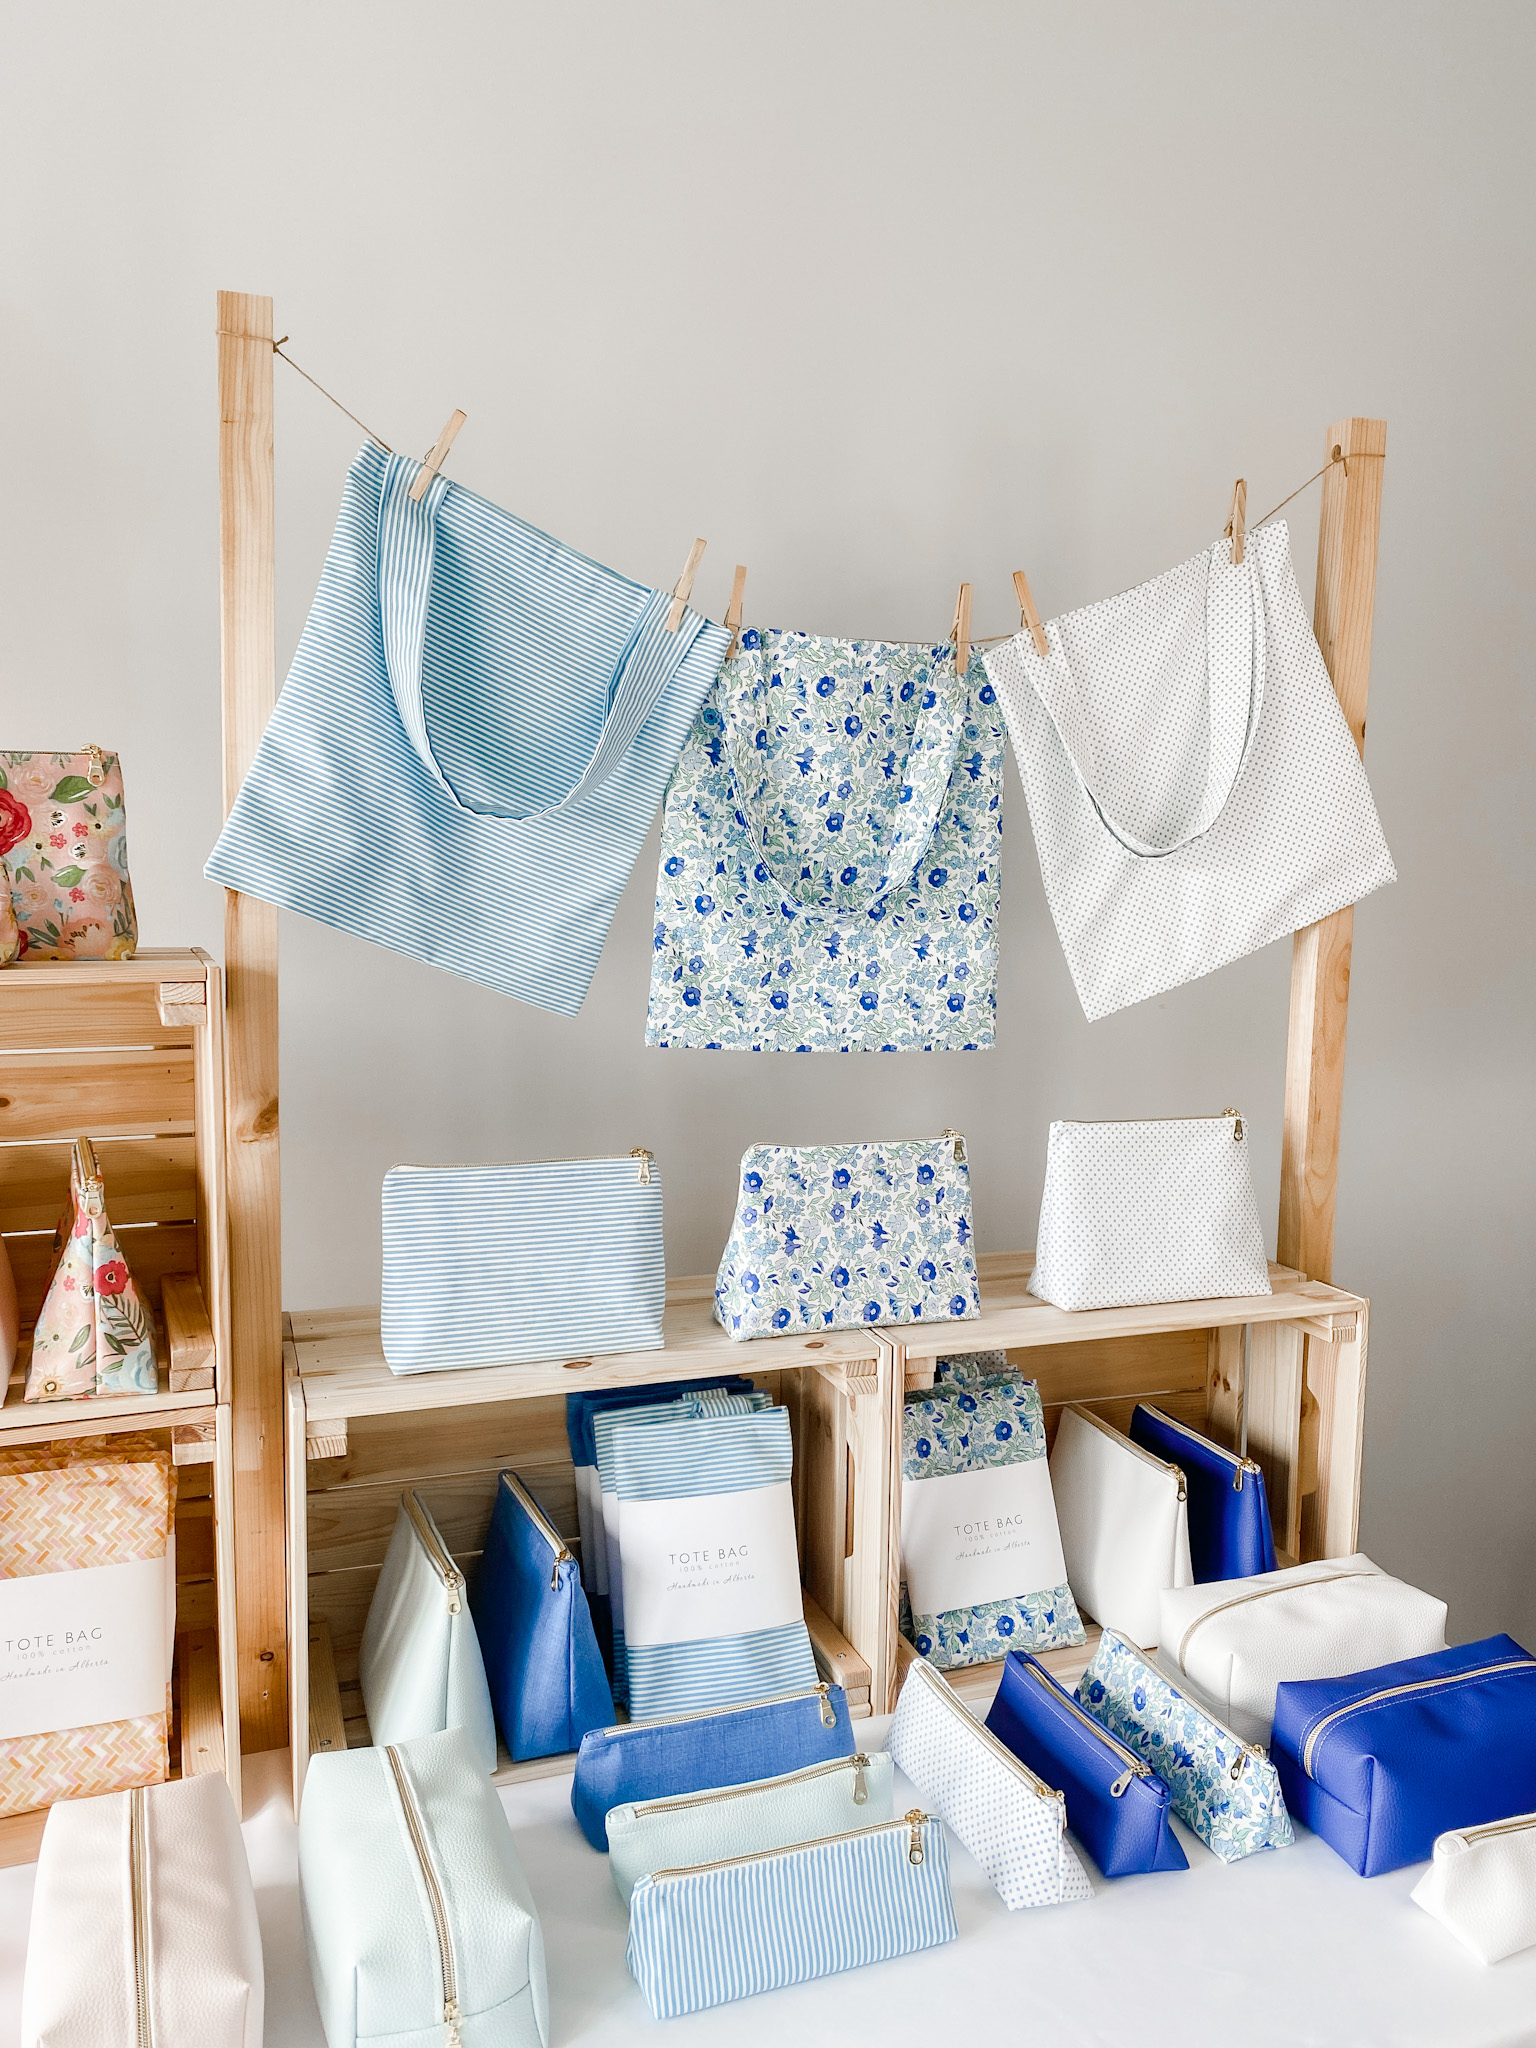 Clothesline to display totes at a craft show